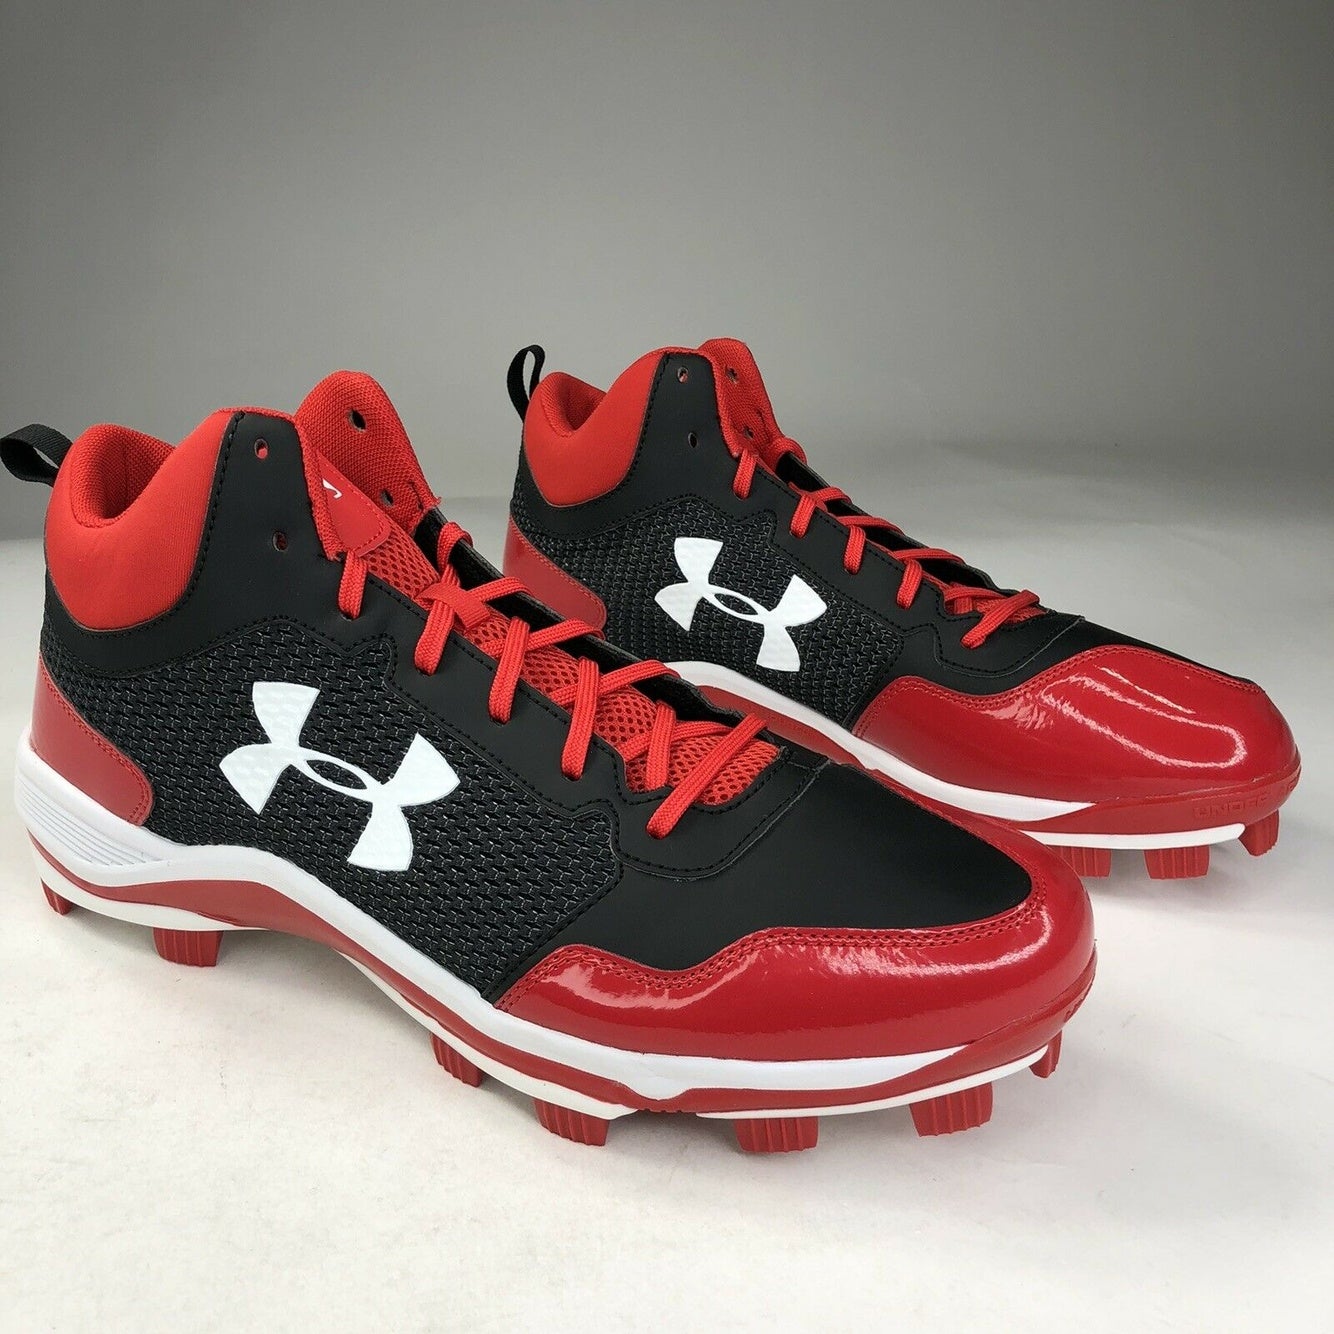 Under Armour UA Heater Mid TPU Black White Mens Baseball Cleats Size 14 1278738 for sale online 